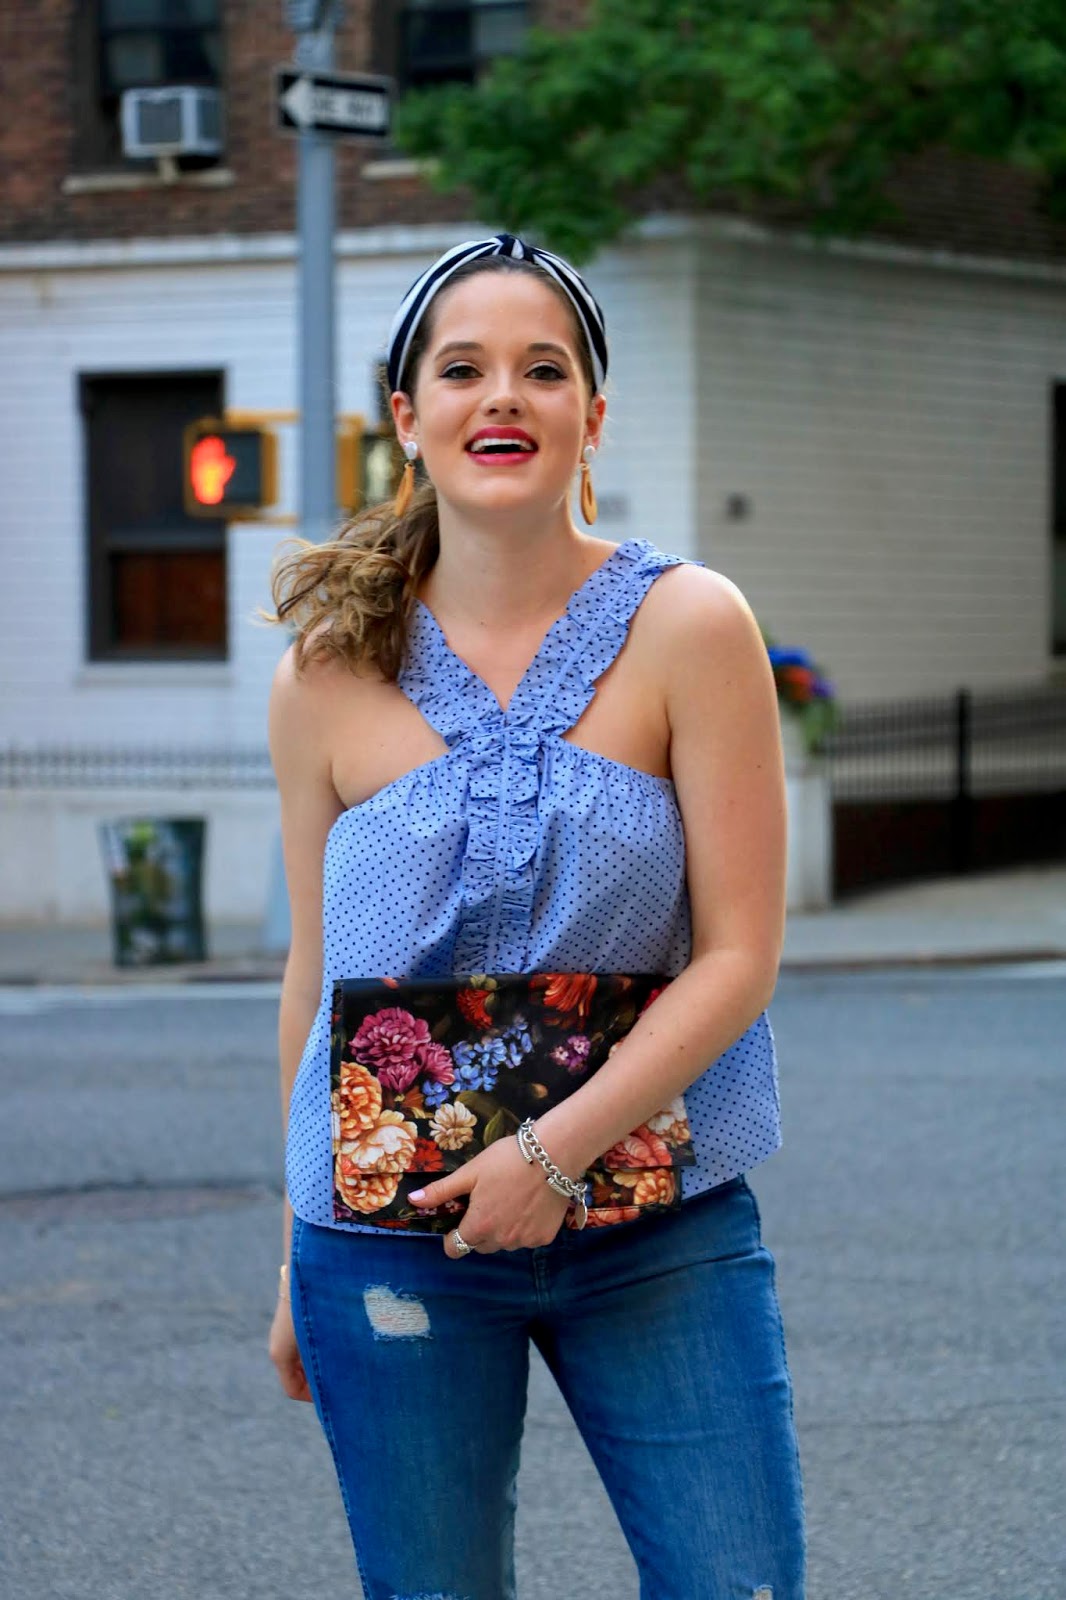 Nyc fashion blogger Kathleen Harper showing how to pattern mix.